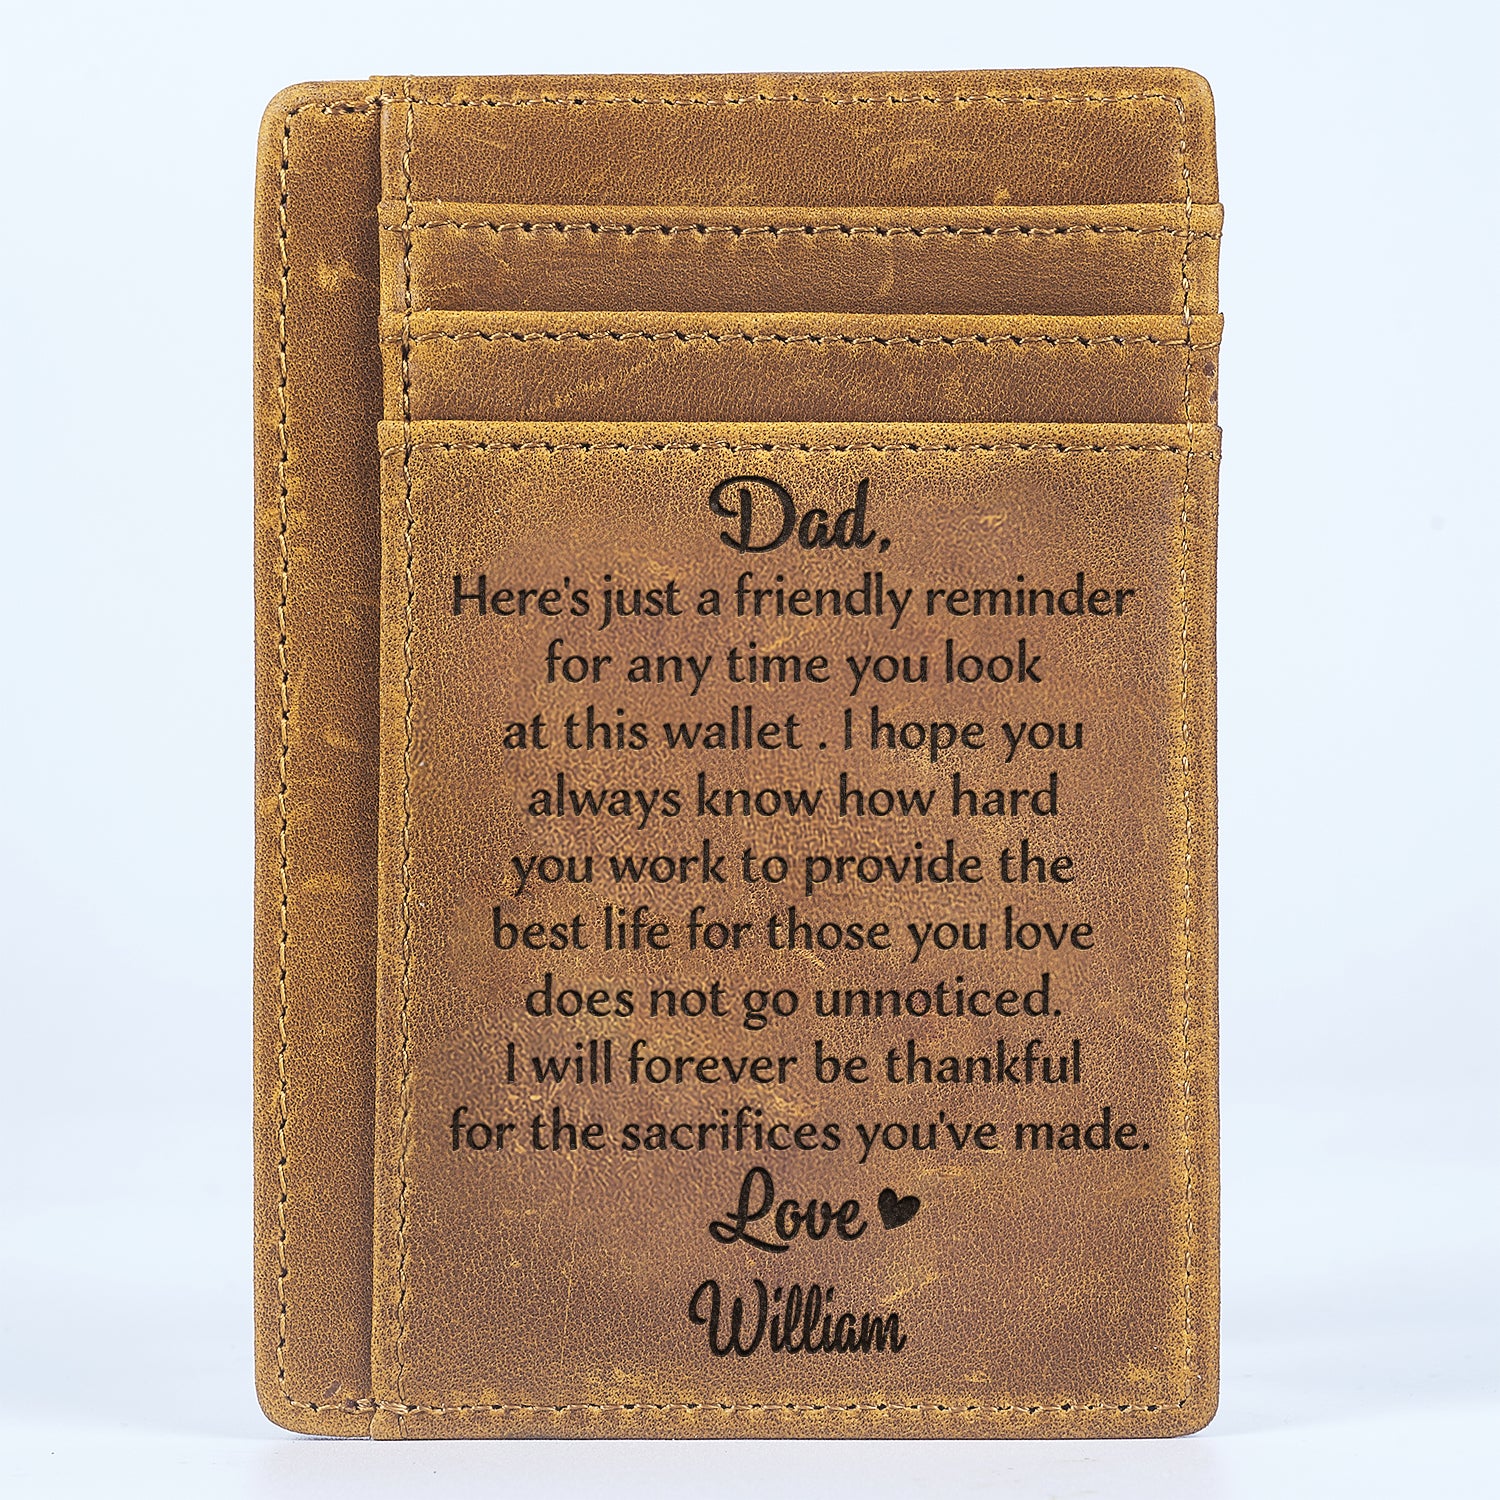 Here's Just A Friendly Reminder - Gift For Dad, Father, Grandpa - Personalized Card Wallet